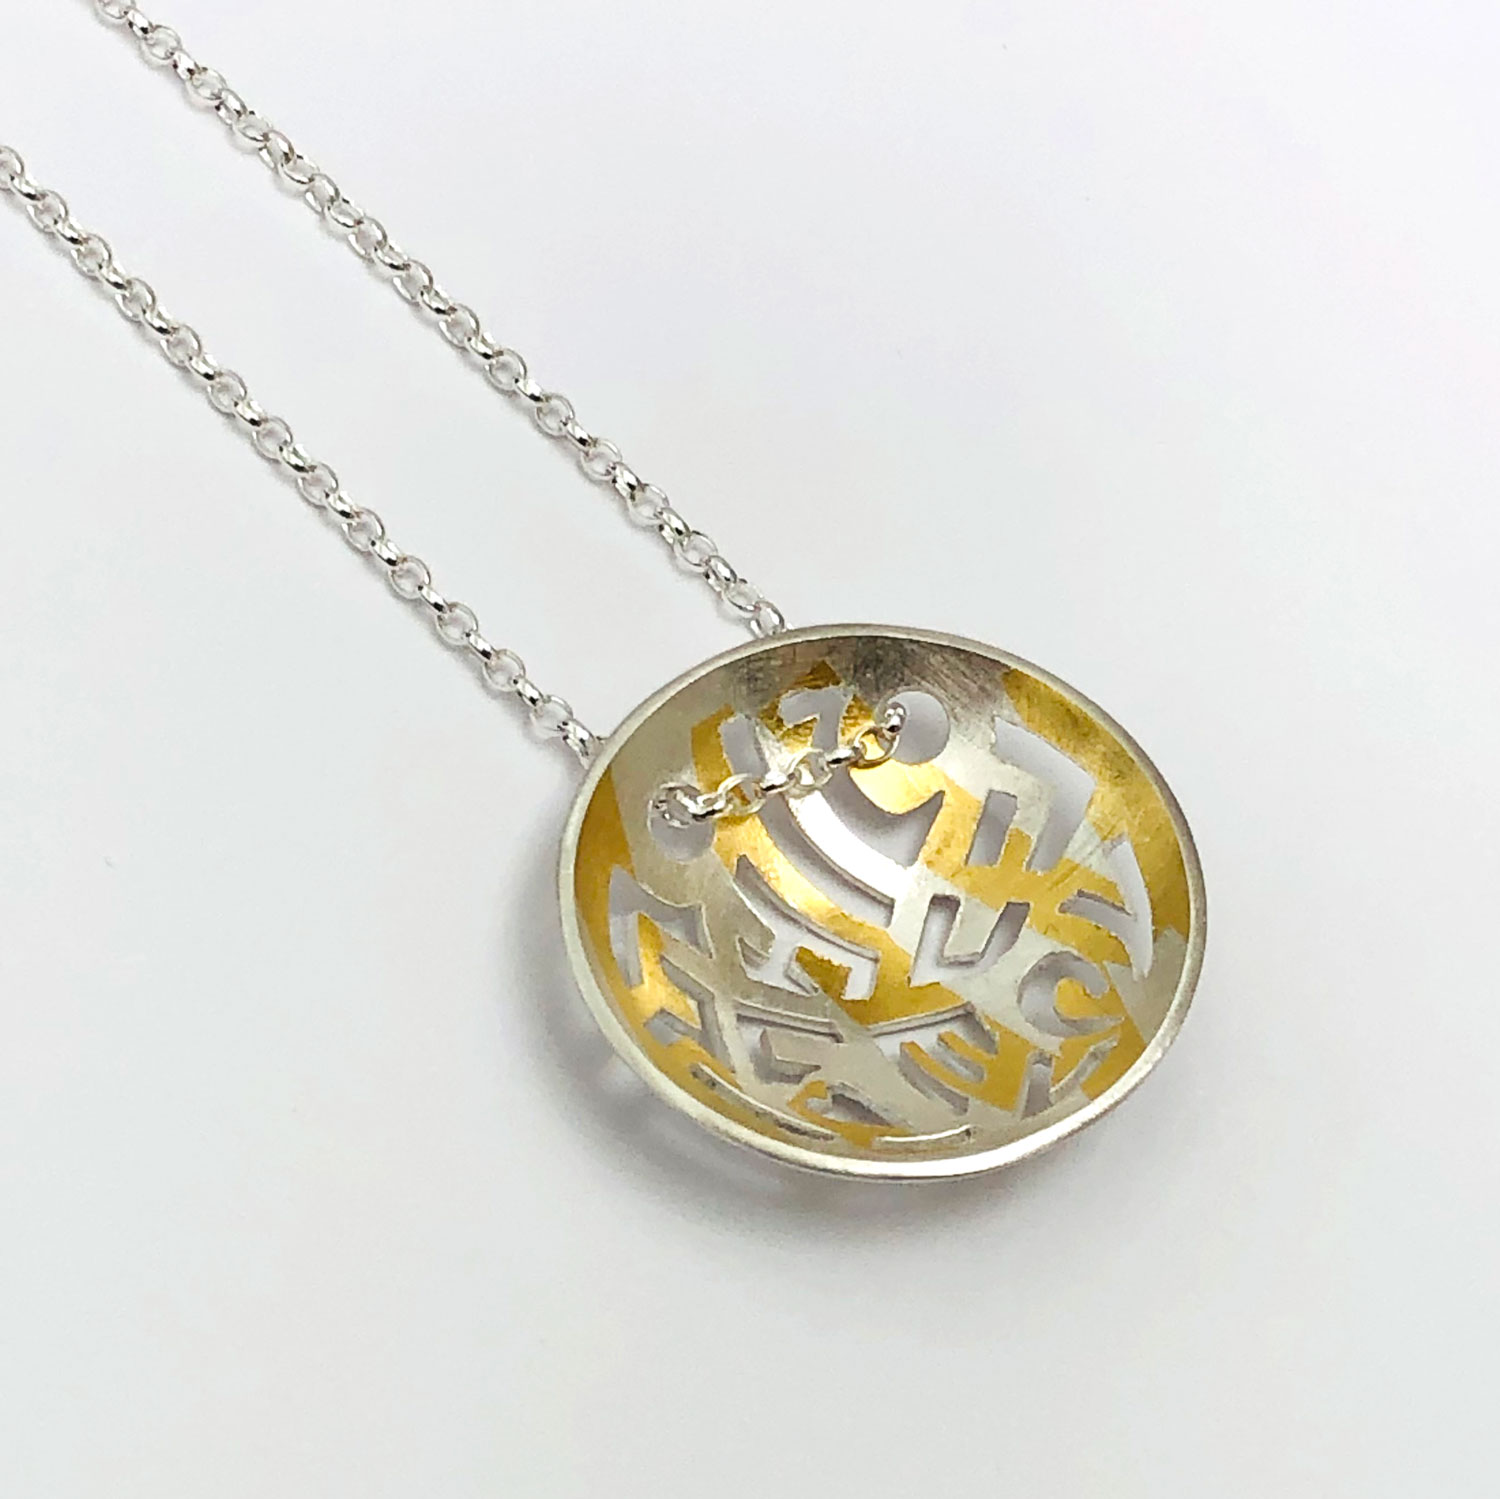 Kate Arbon Silver Coded Pendant